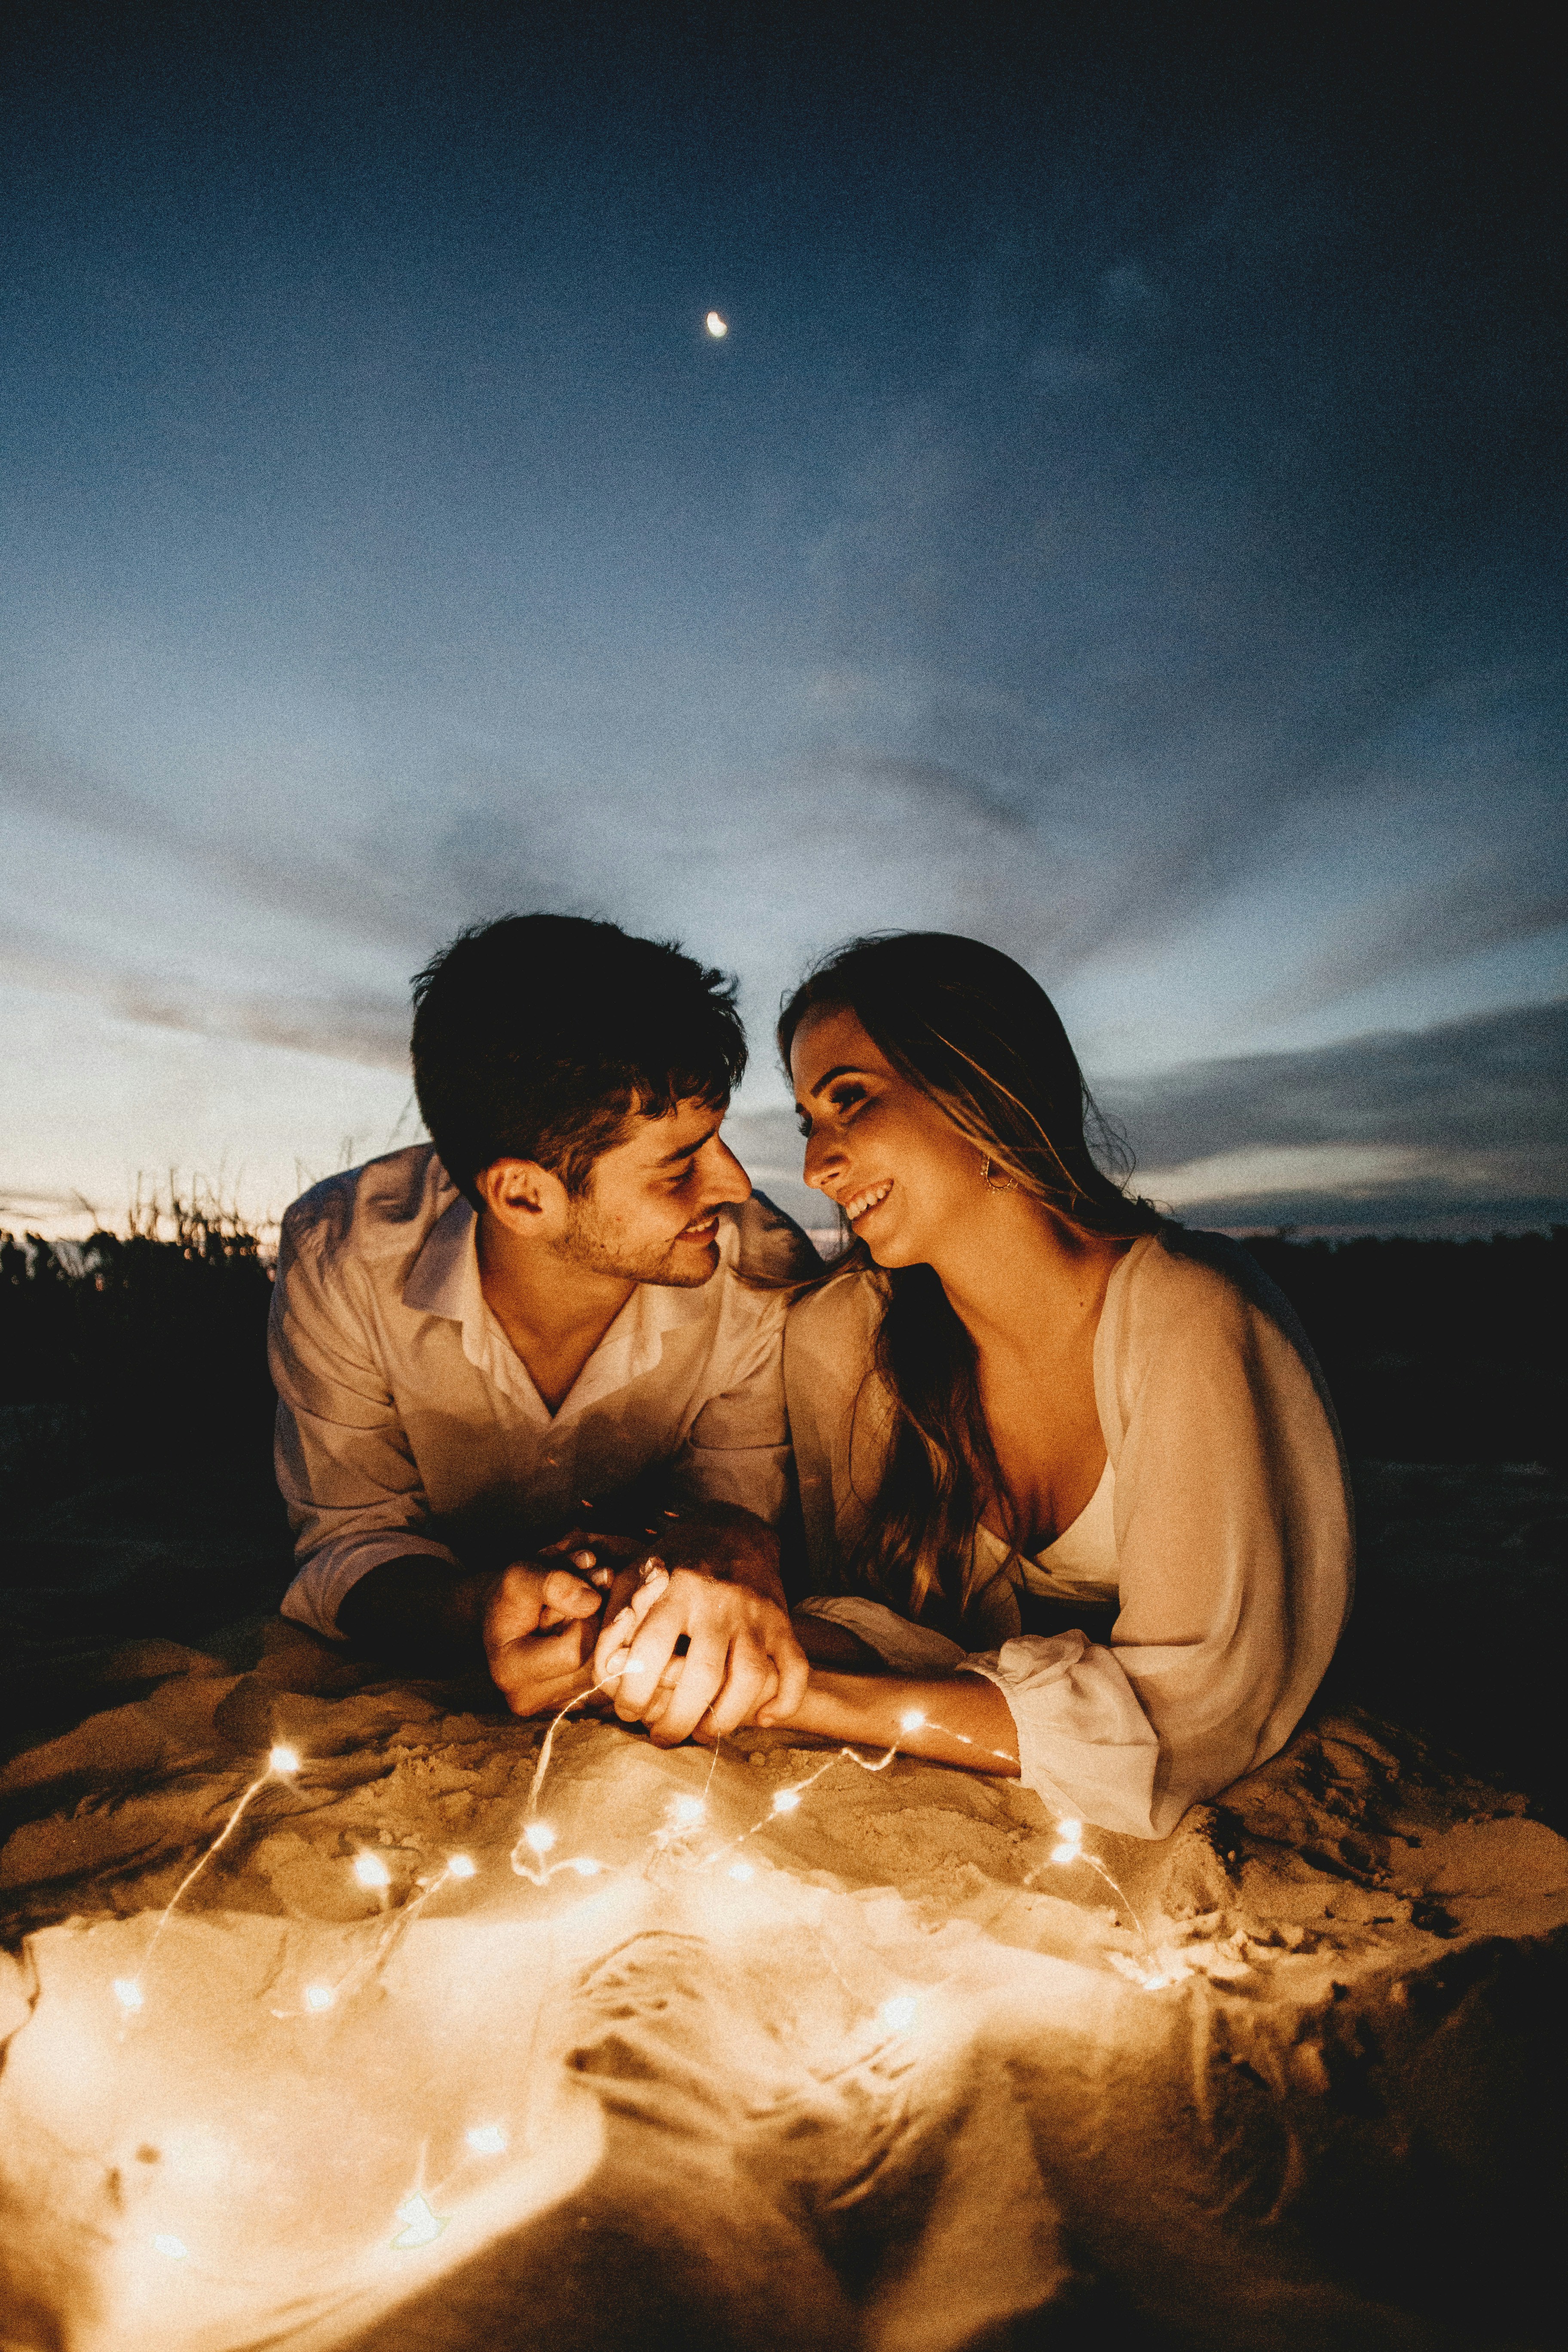 500+ Boyfriend And Girlfriend Pictures Download Free Images on Unsplash